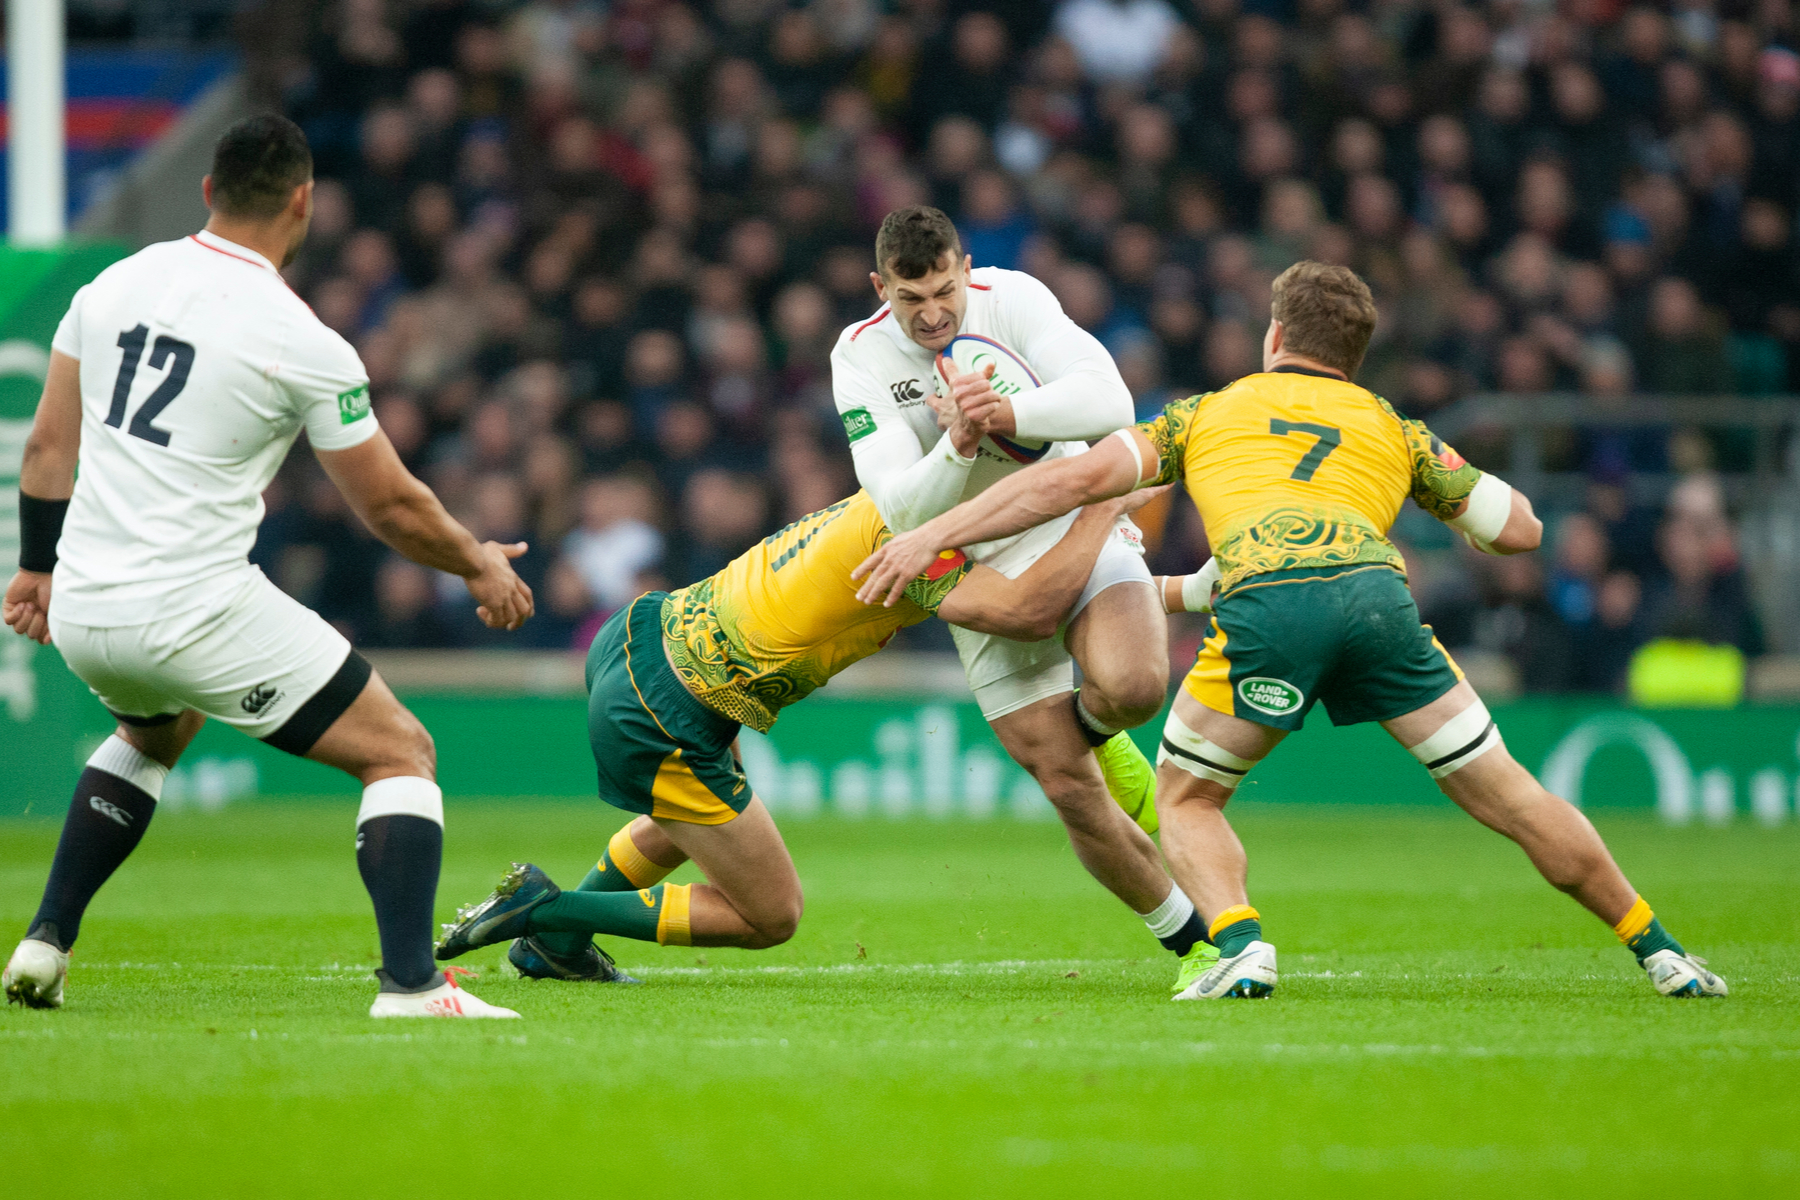 5 of the most memorable moments in England vs Australia internationals